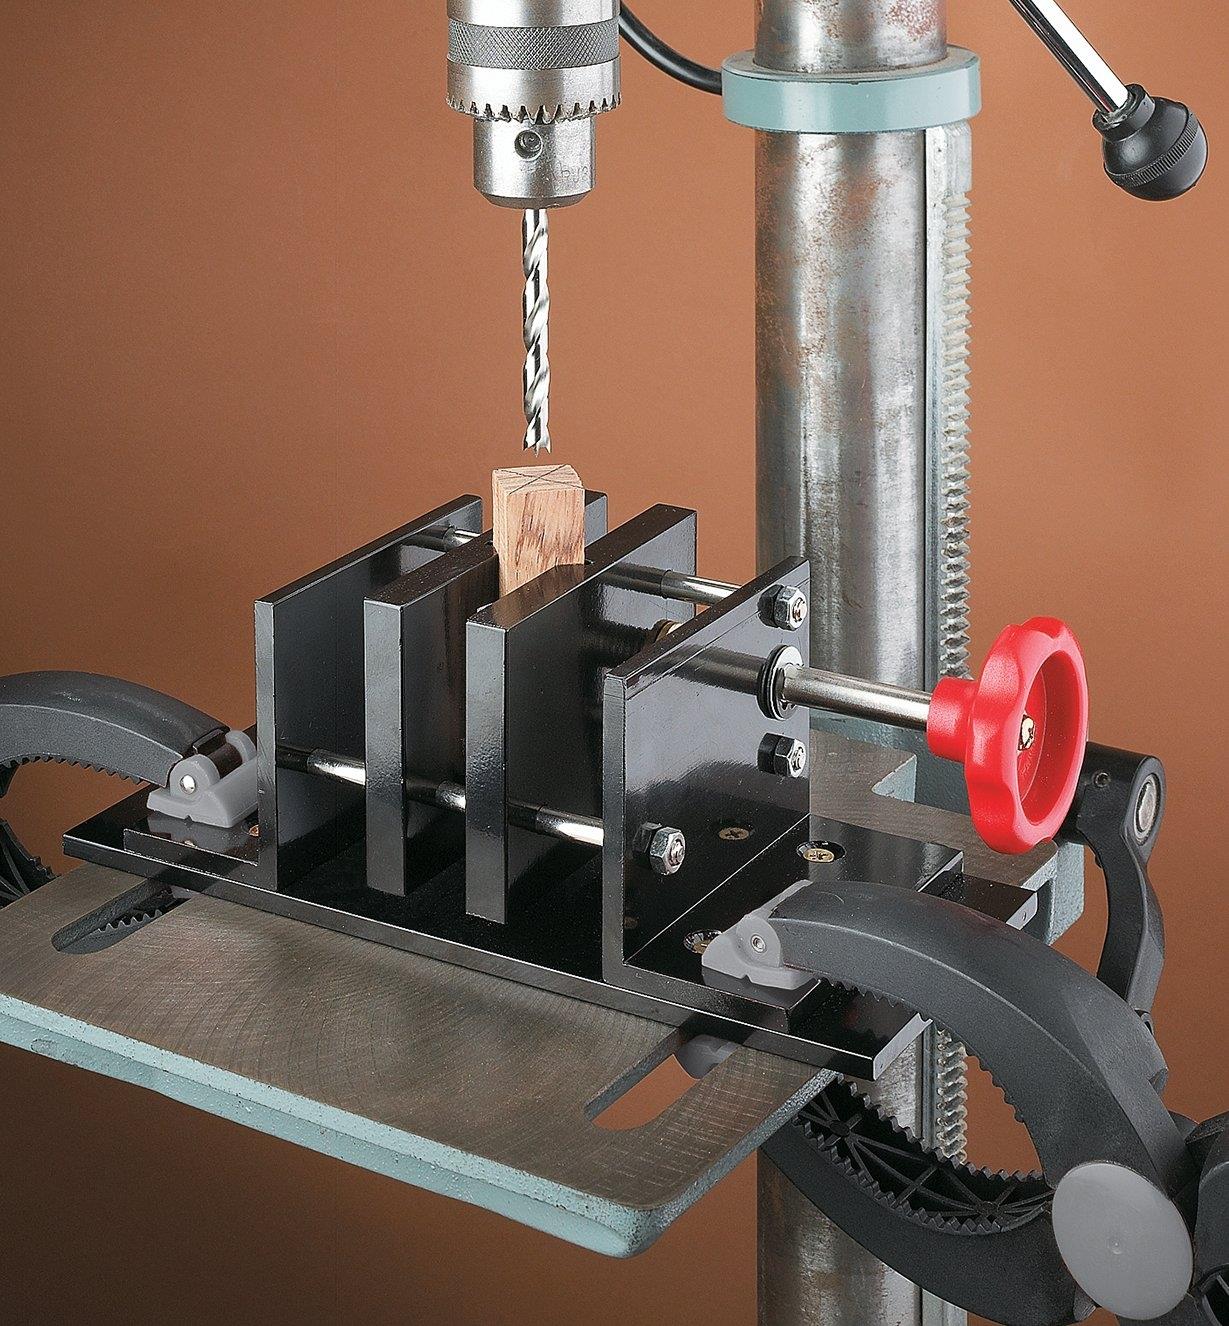 Vise clamped to a drill press in preparation for drilling a pen blank